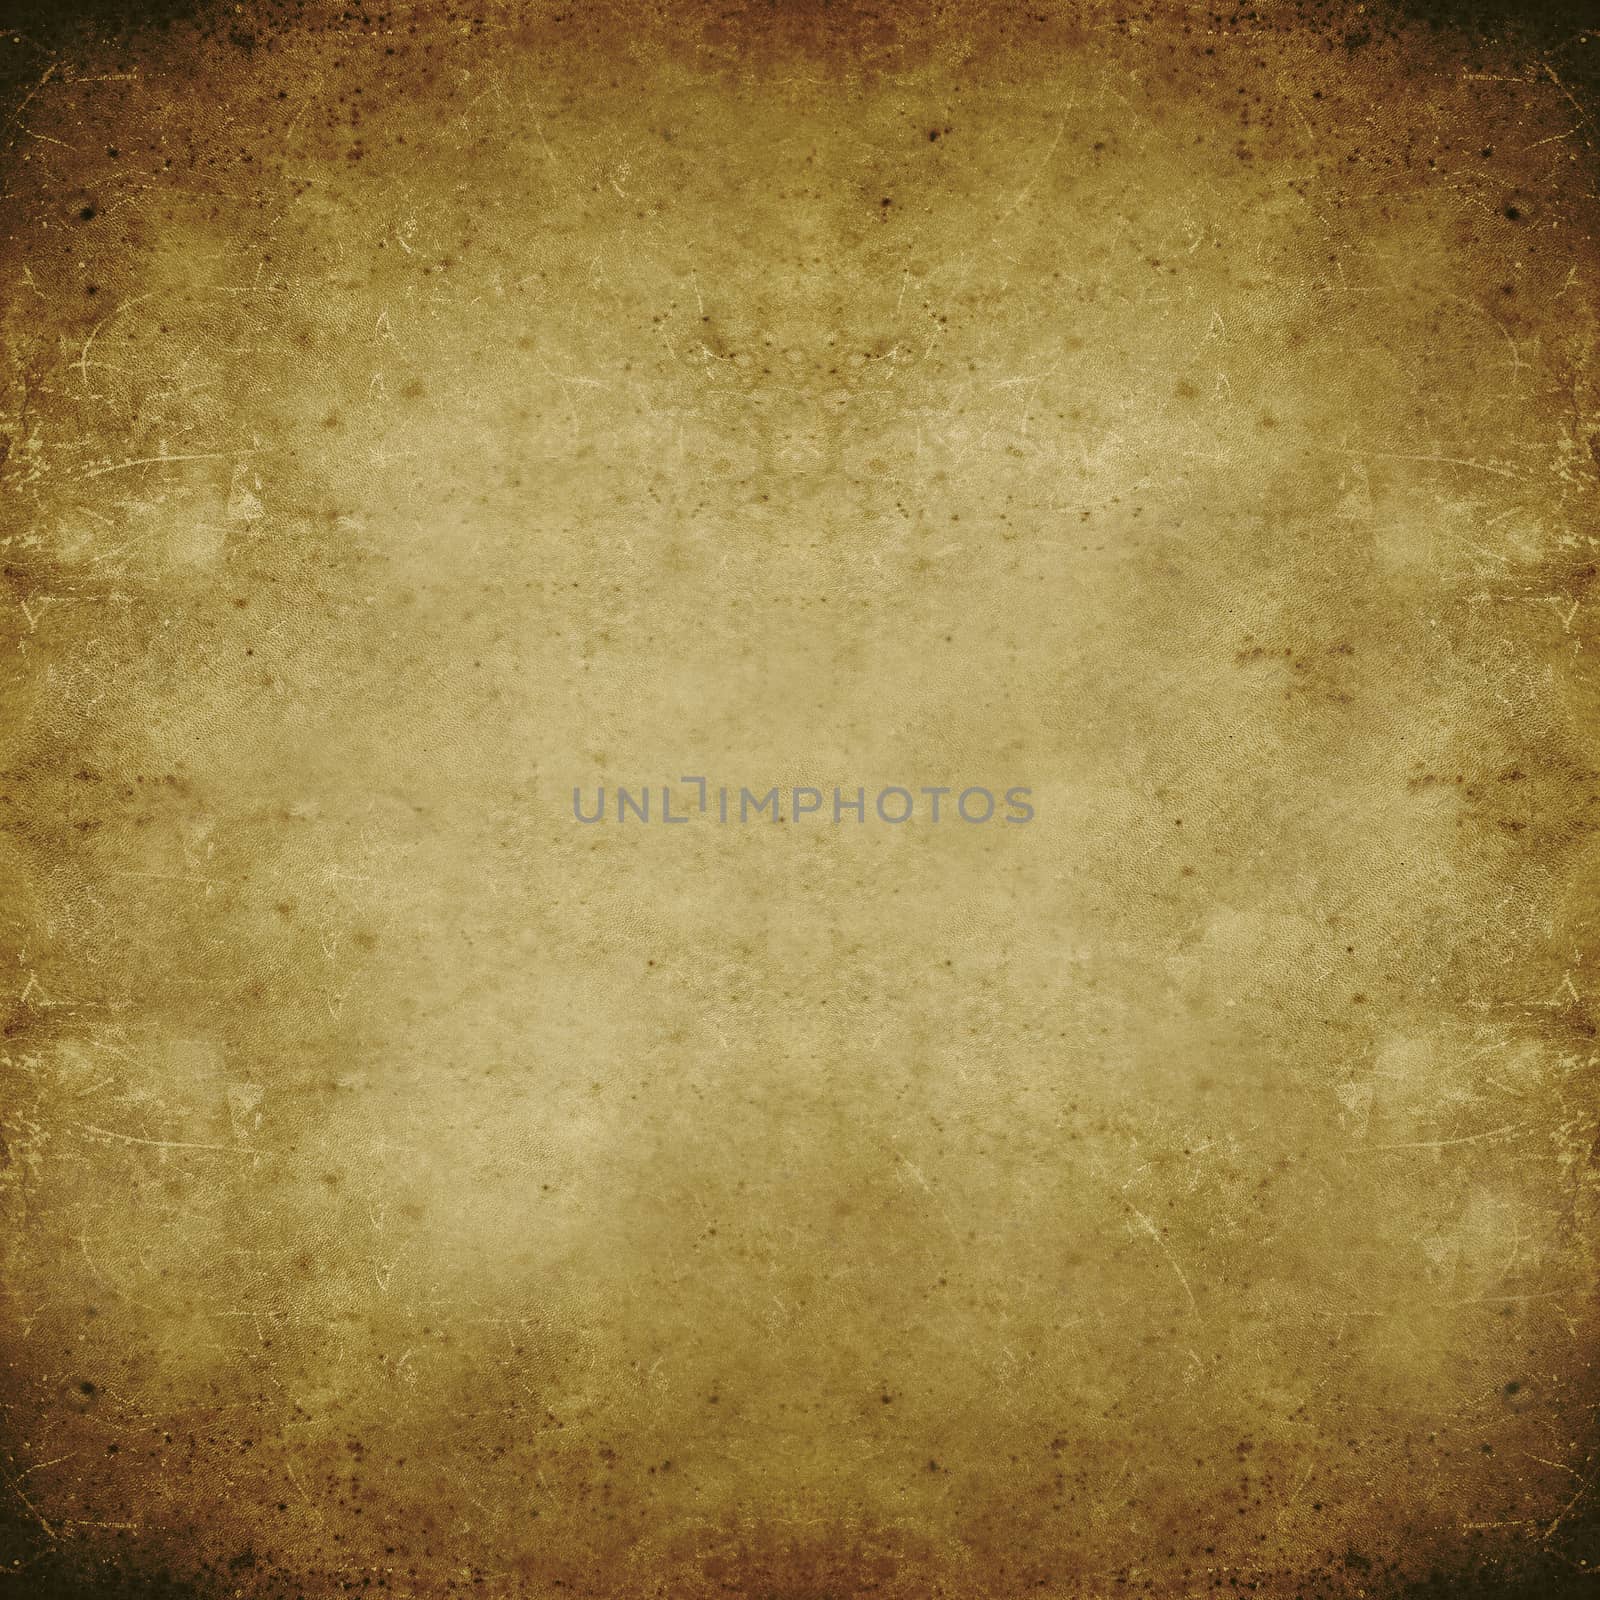 old dirty abstract background square